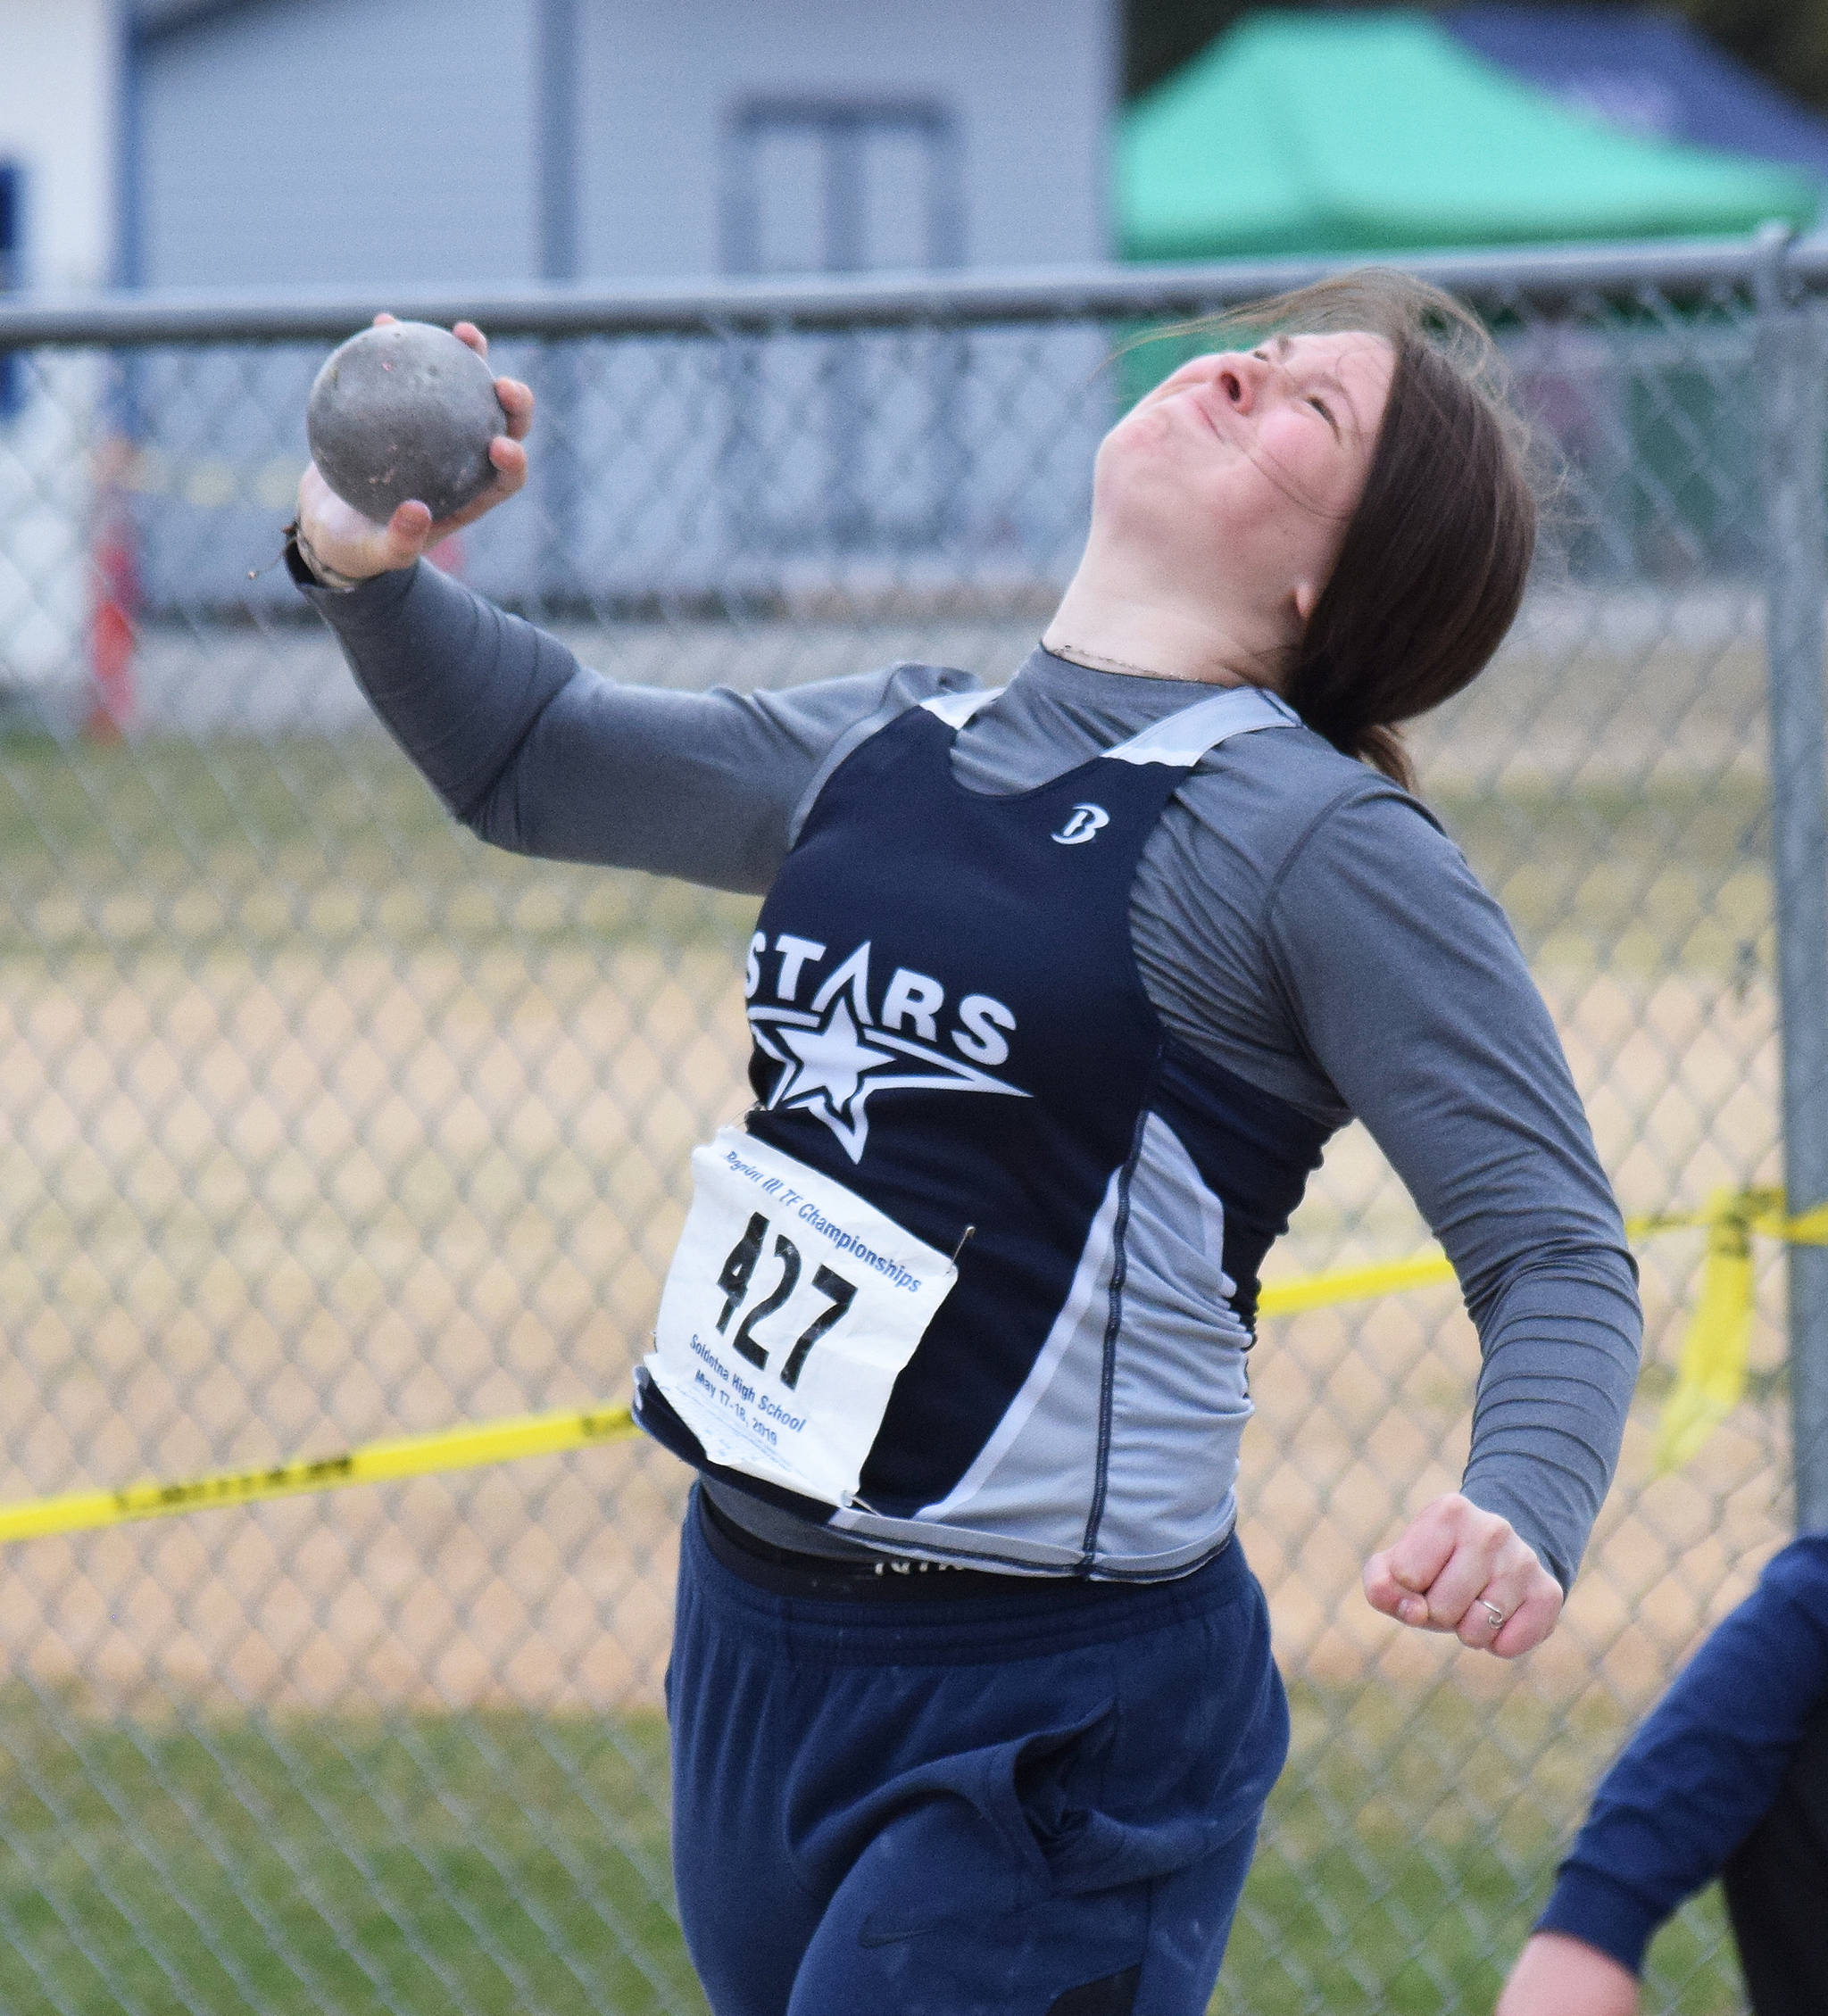 Soldotna’s Autumn Fisher unleashes a shot put throw Saturday, May 18, 2019, at the Region III Track and Field Championships in Soldotna, Alaska. (Photo by Joey Klecka/Peninsula Clarion)